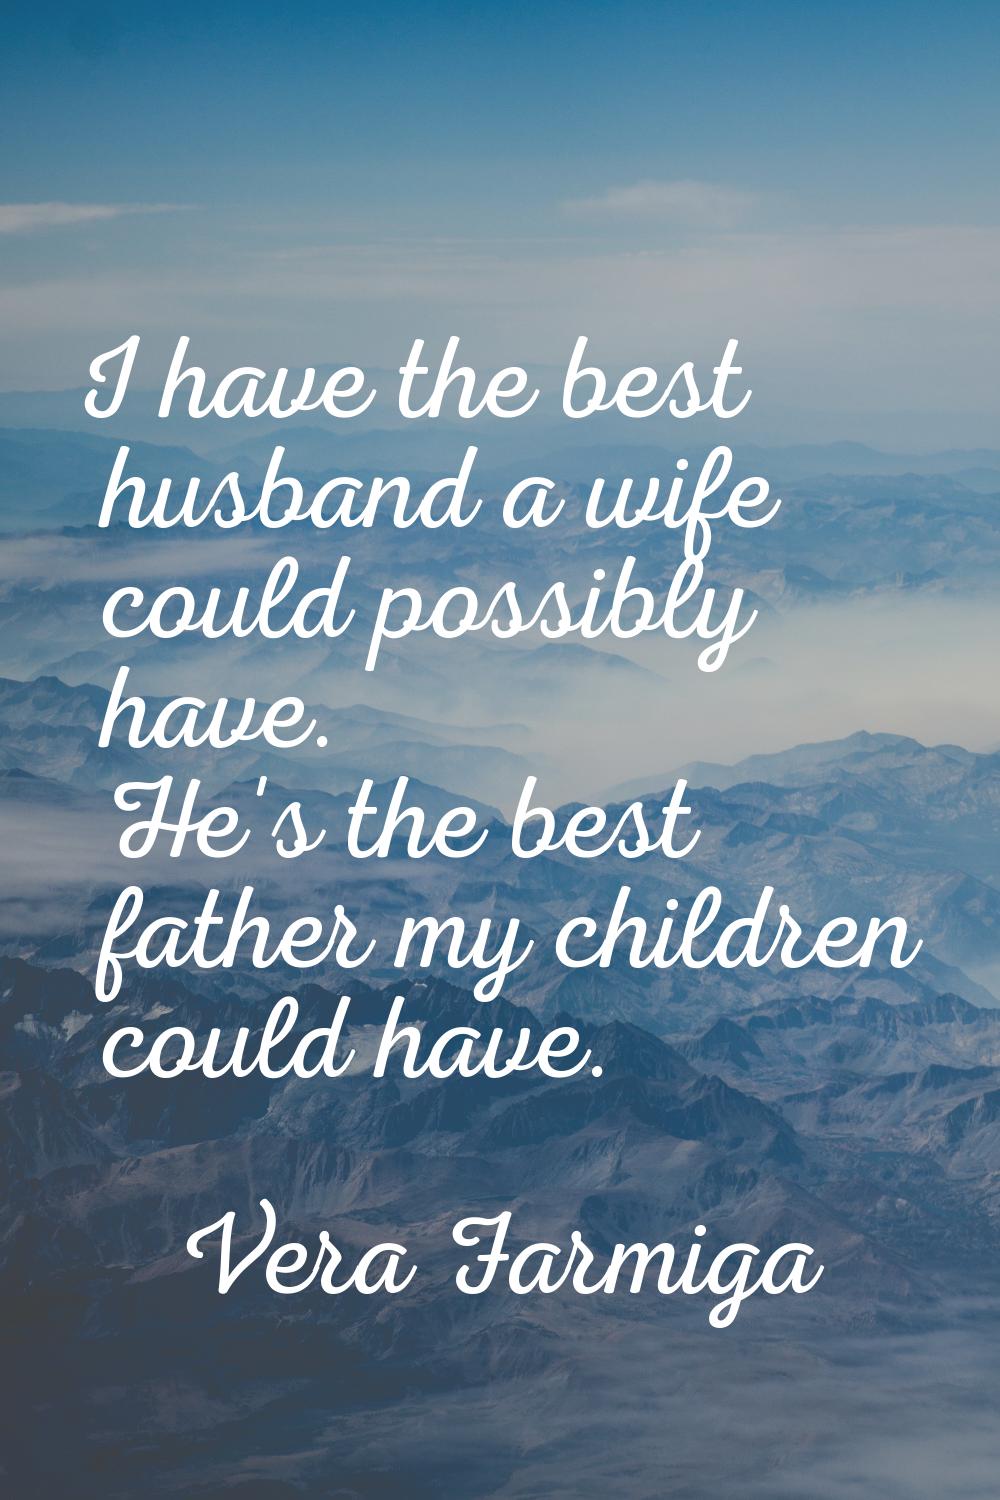 I have the best husband a wife could possibly have. He's the best father my children could have.